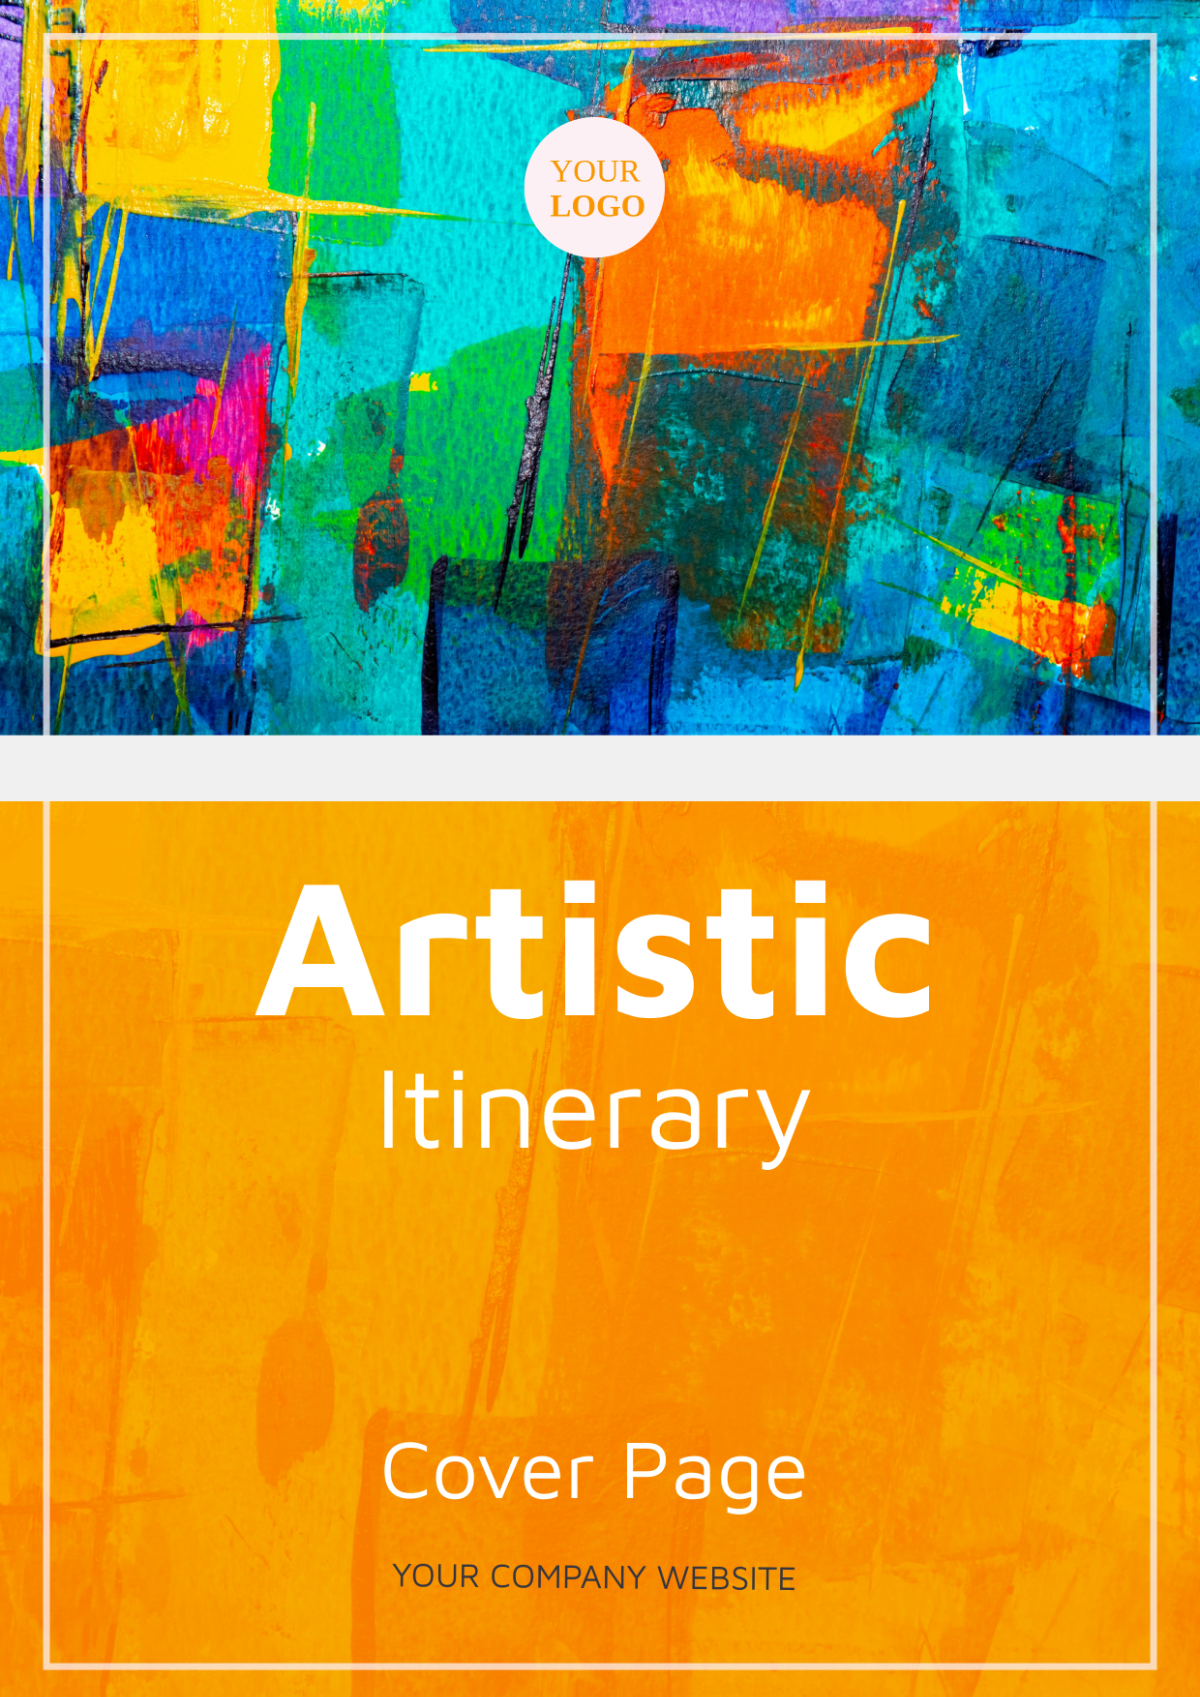 Artistic Itinerary Cover Page